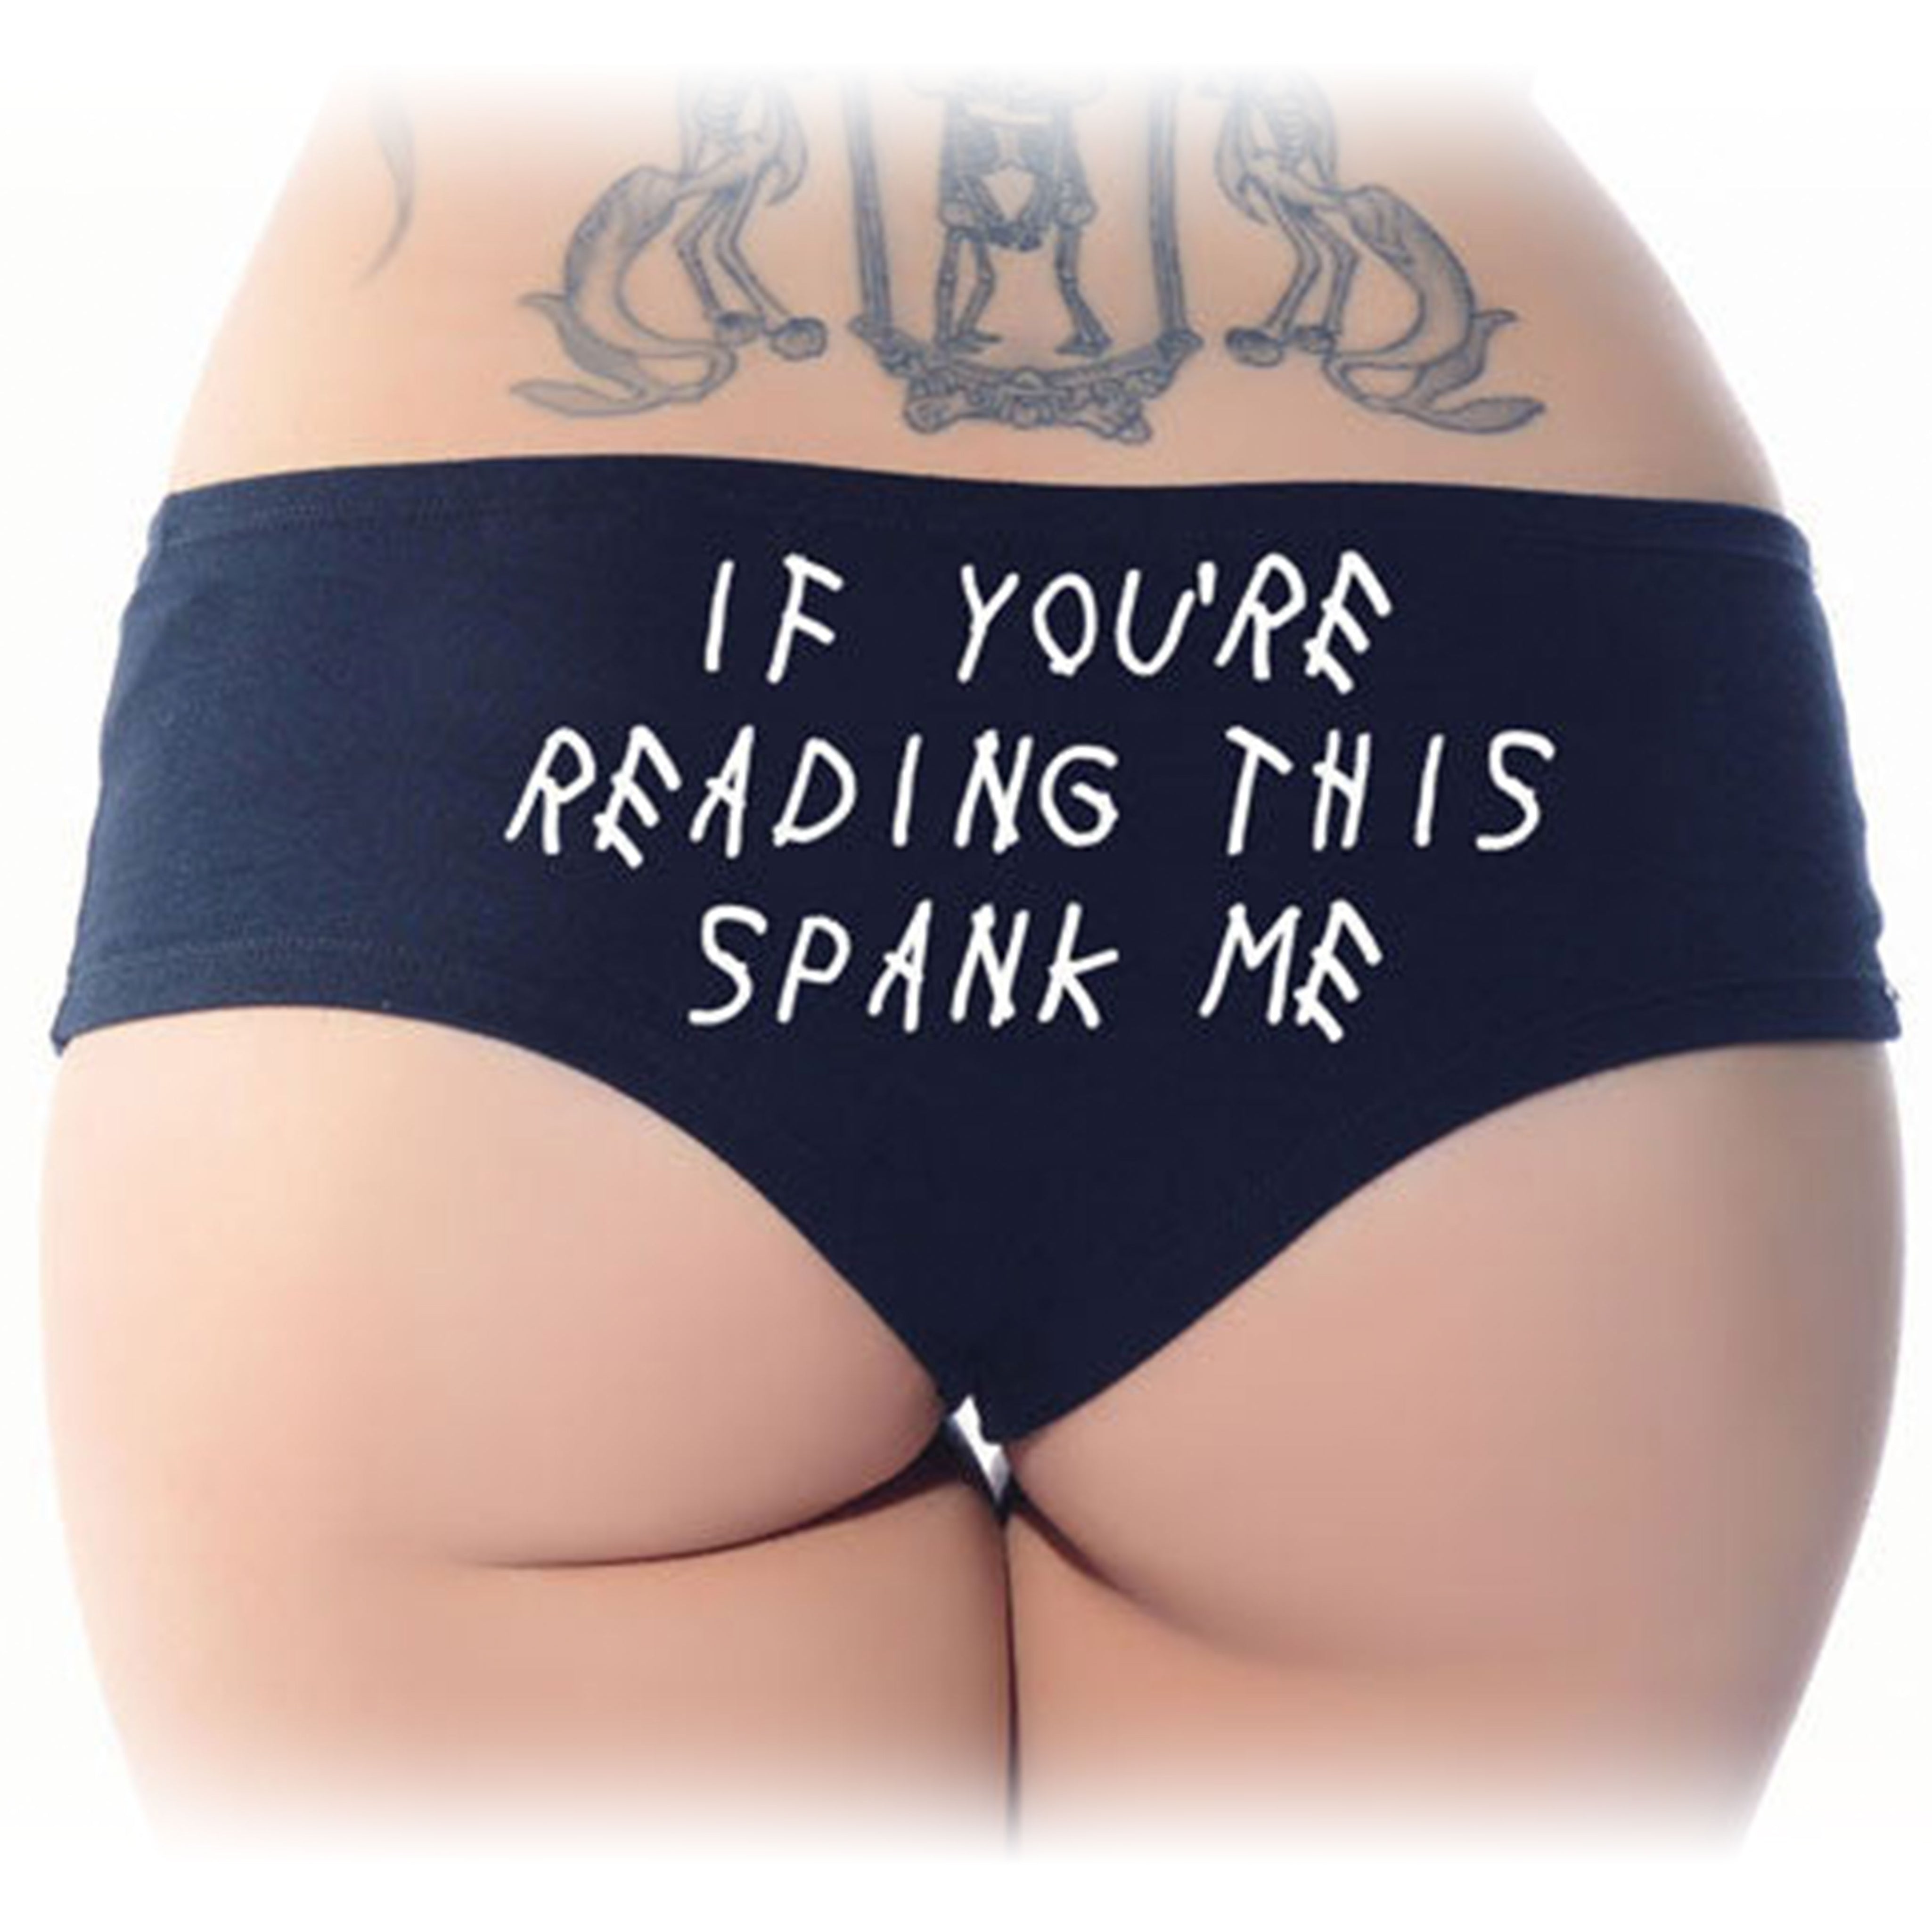 "If YOU ARE READING THIS SPANK ME" Booty Shorts Black